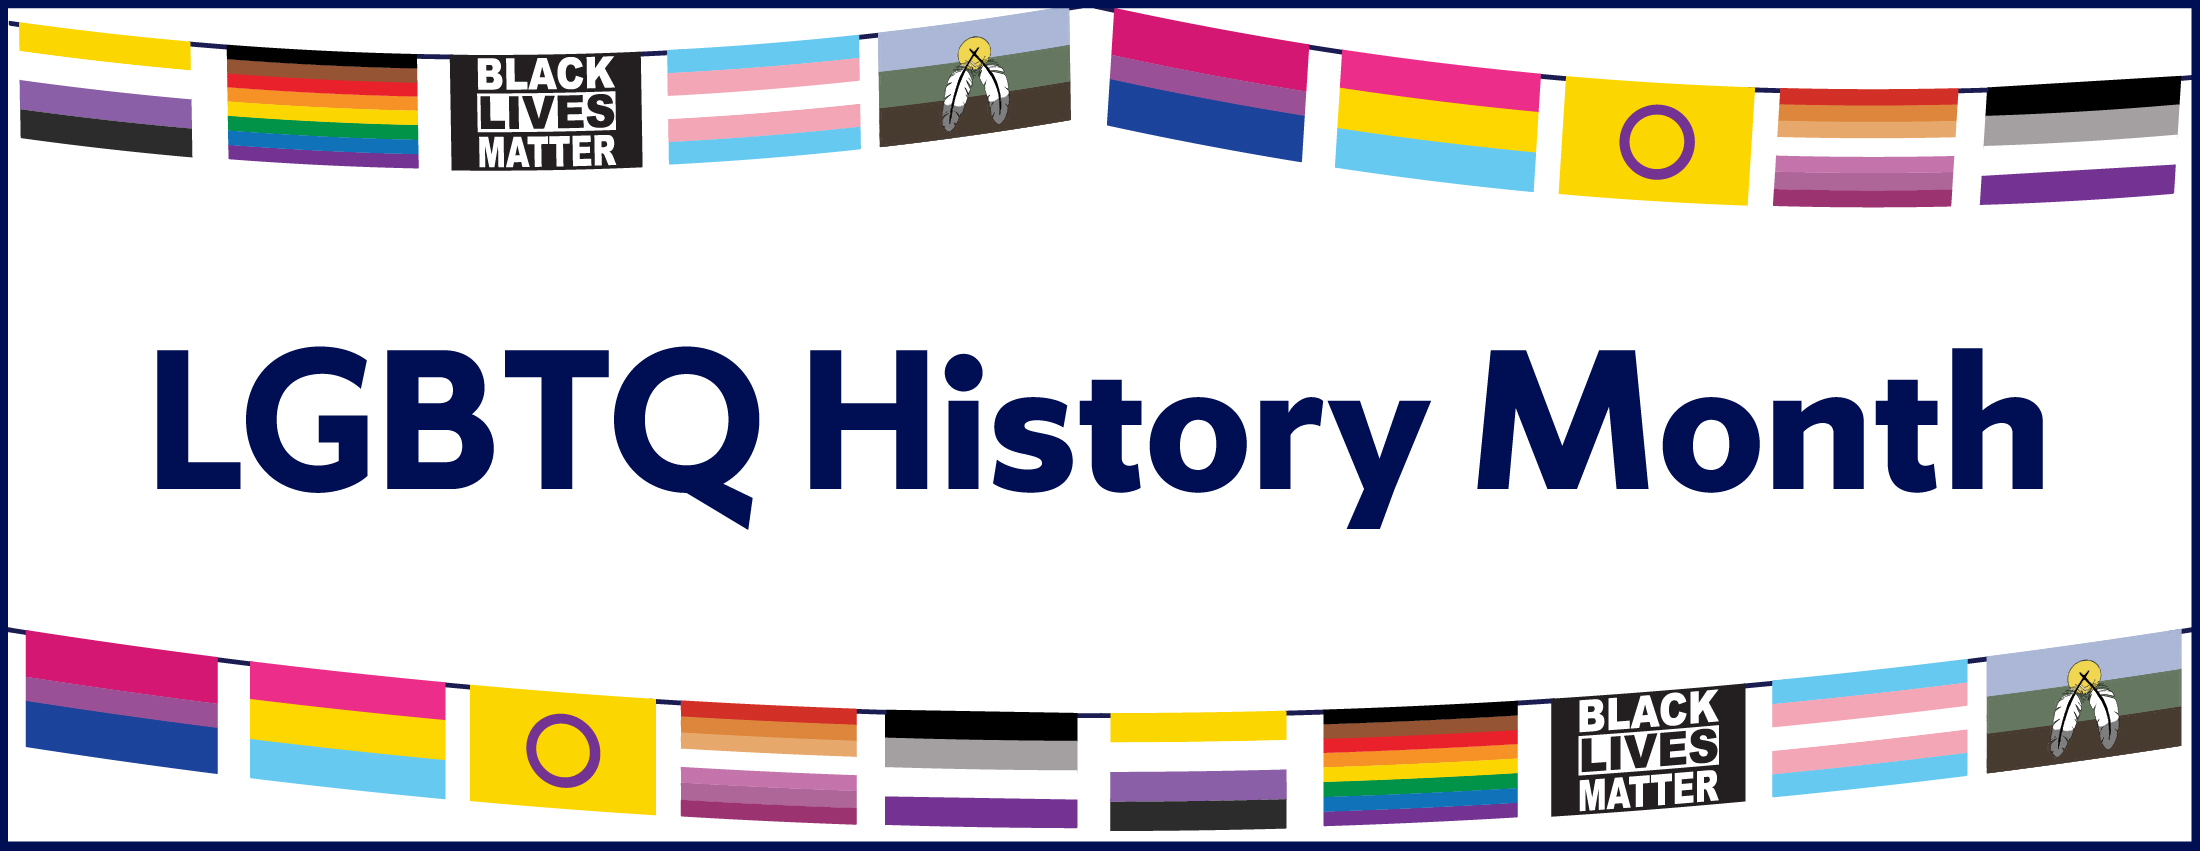 "LGBTQ History Month" written in navy overtop a white background. Words are bordered by various flags that represent the LGBTQ community